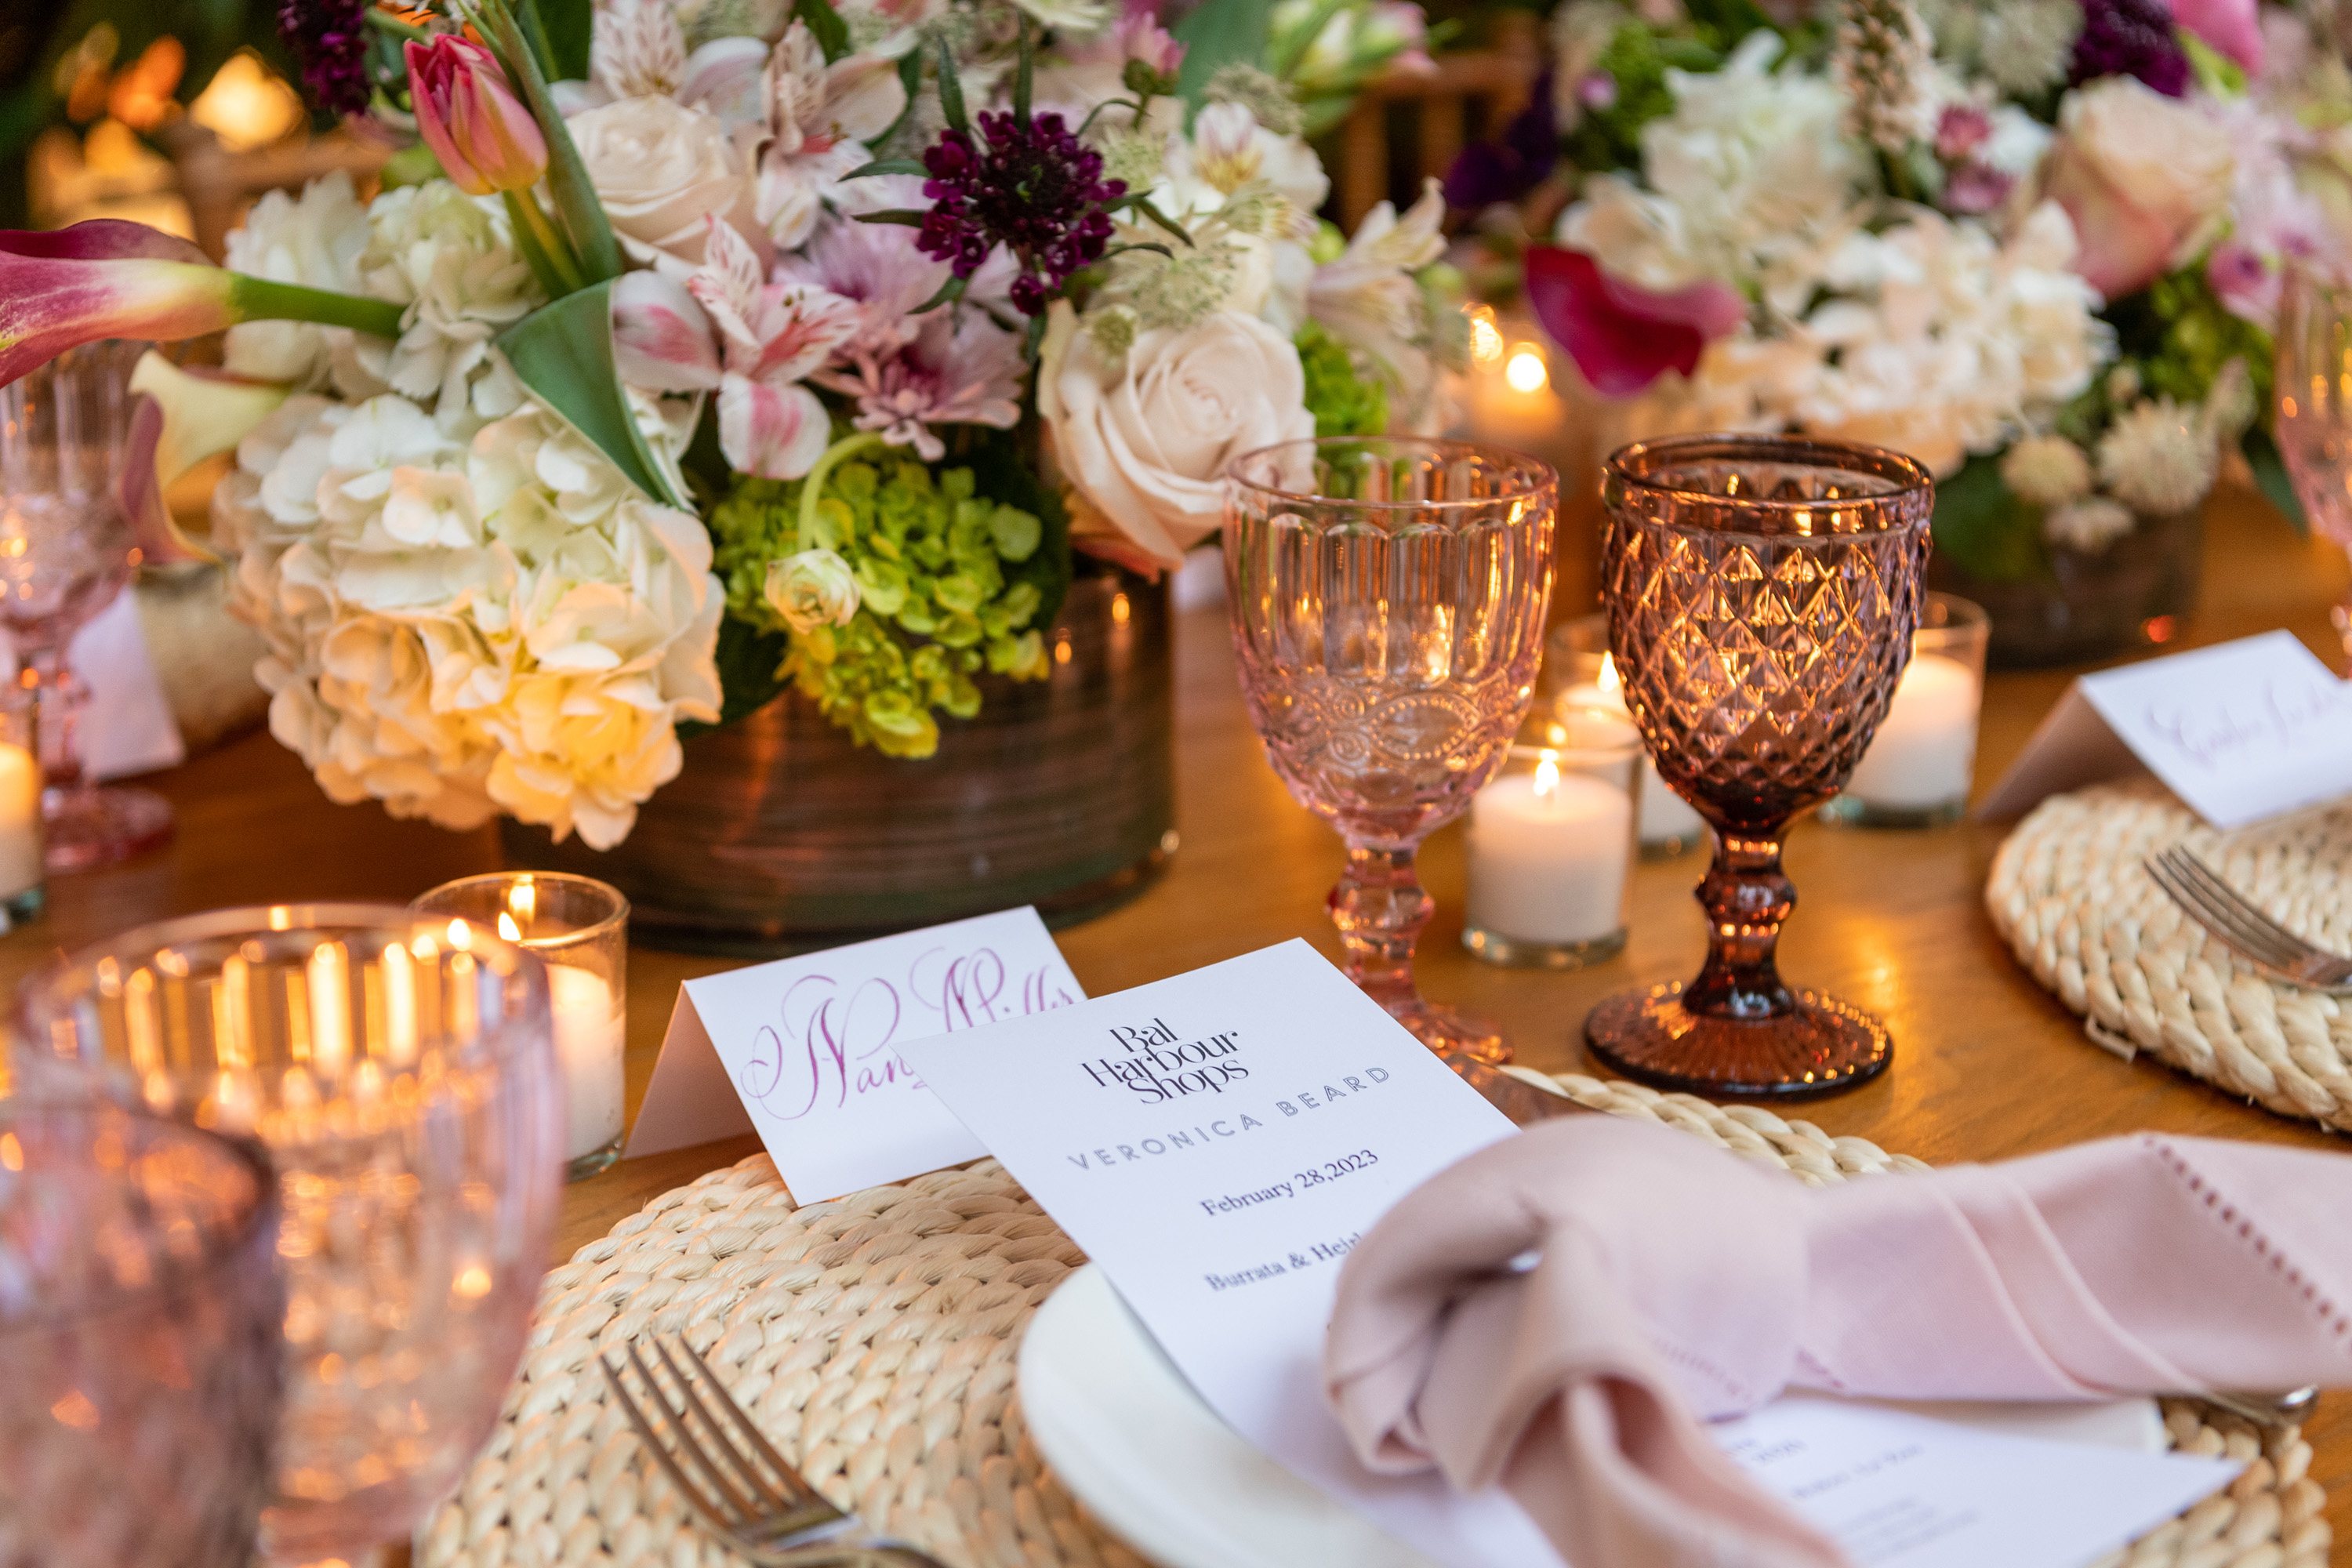 Table setting details including menu, decor, placecards, and florals.